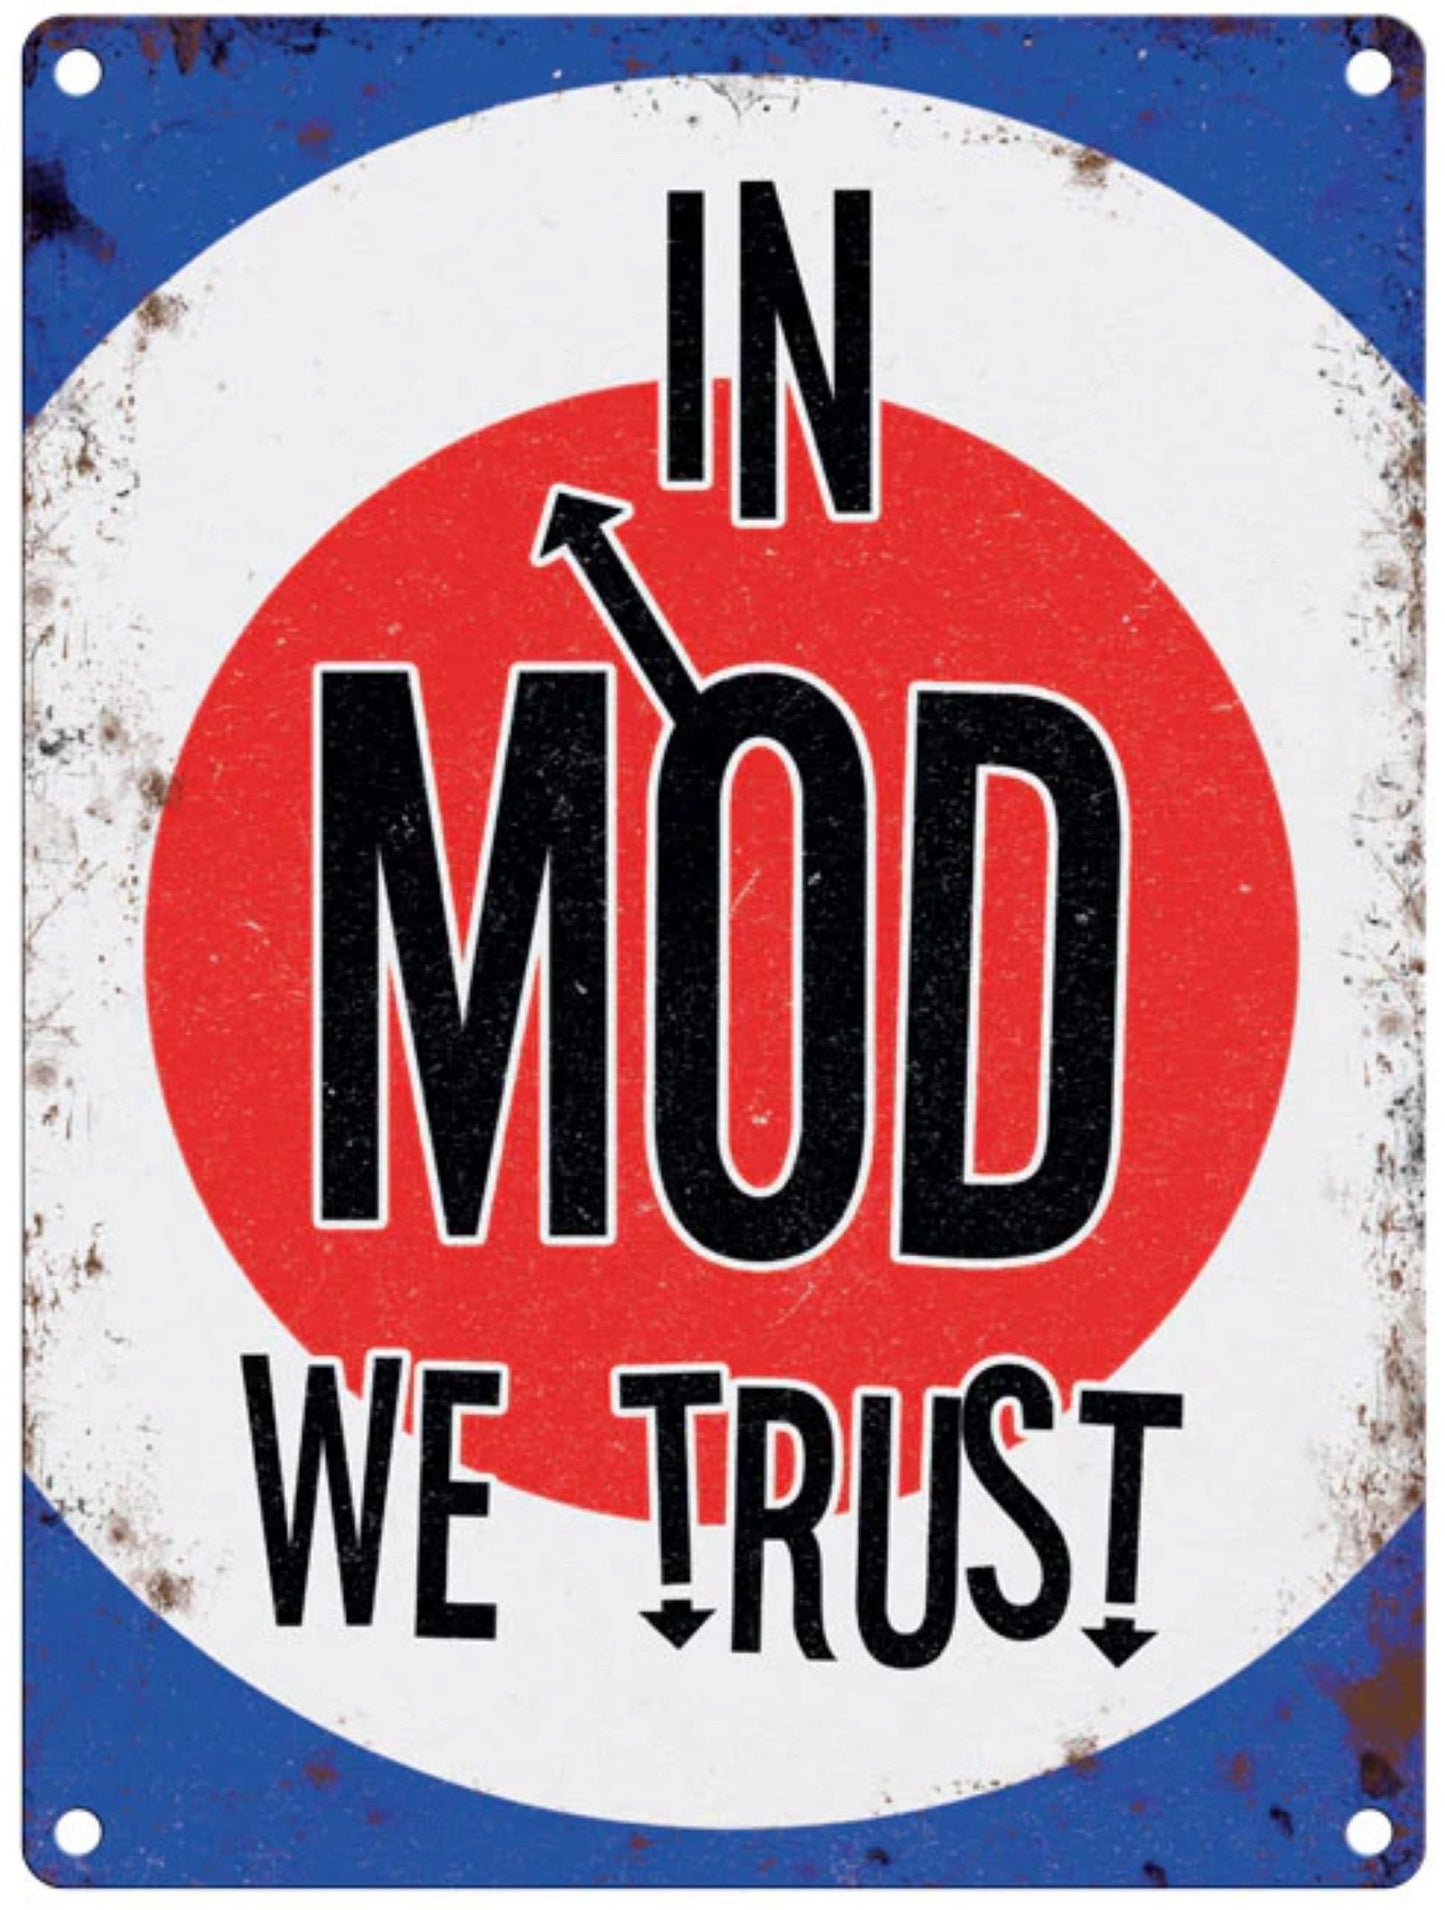 Large Metal Sign 60 x 49.5cm Music In Mod We Trust